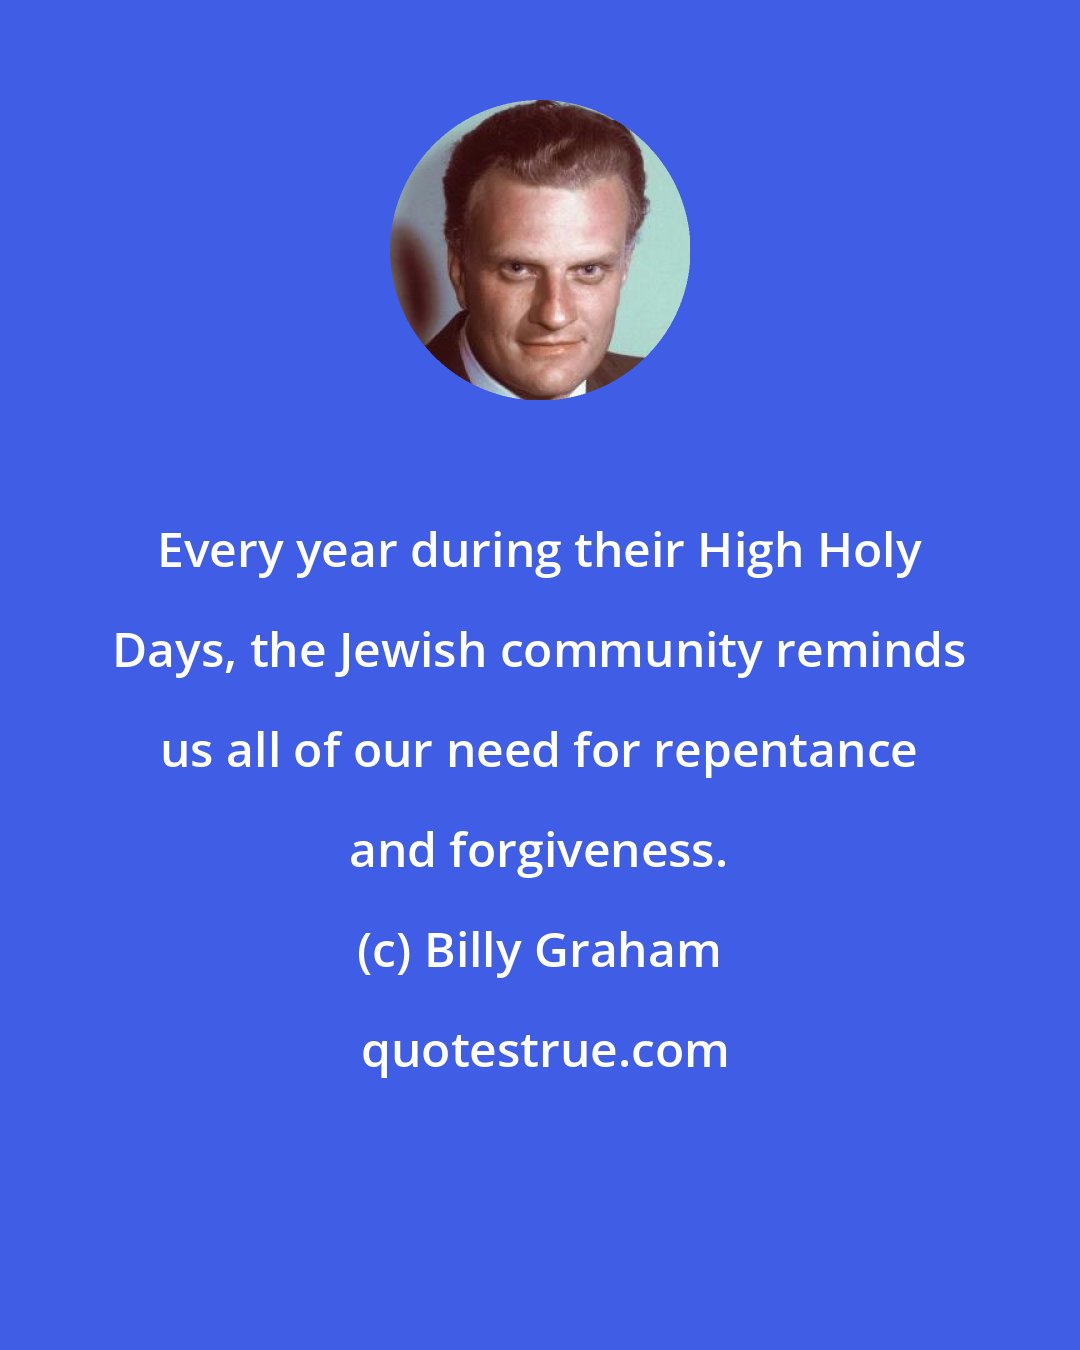 Billy Graham: Every year during their High Holy Days, the Jewish community reminds us all of our need for repentance and forgiveness.